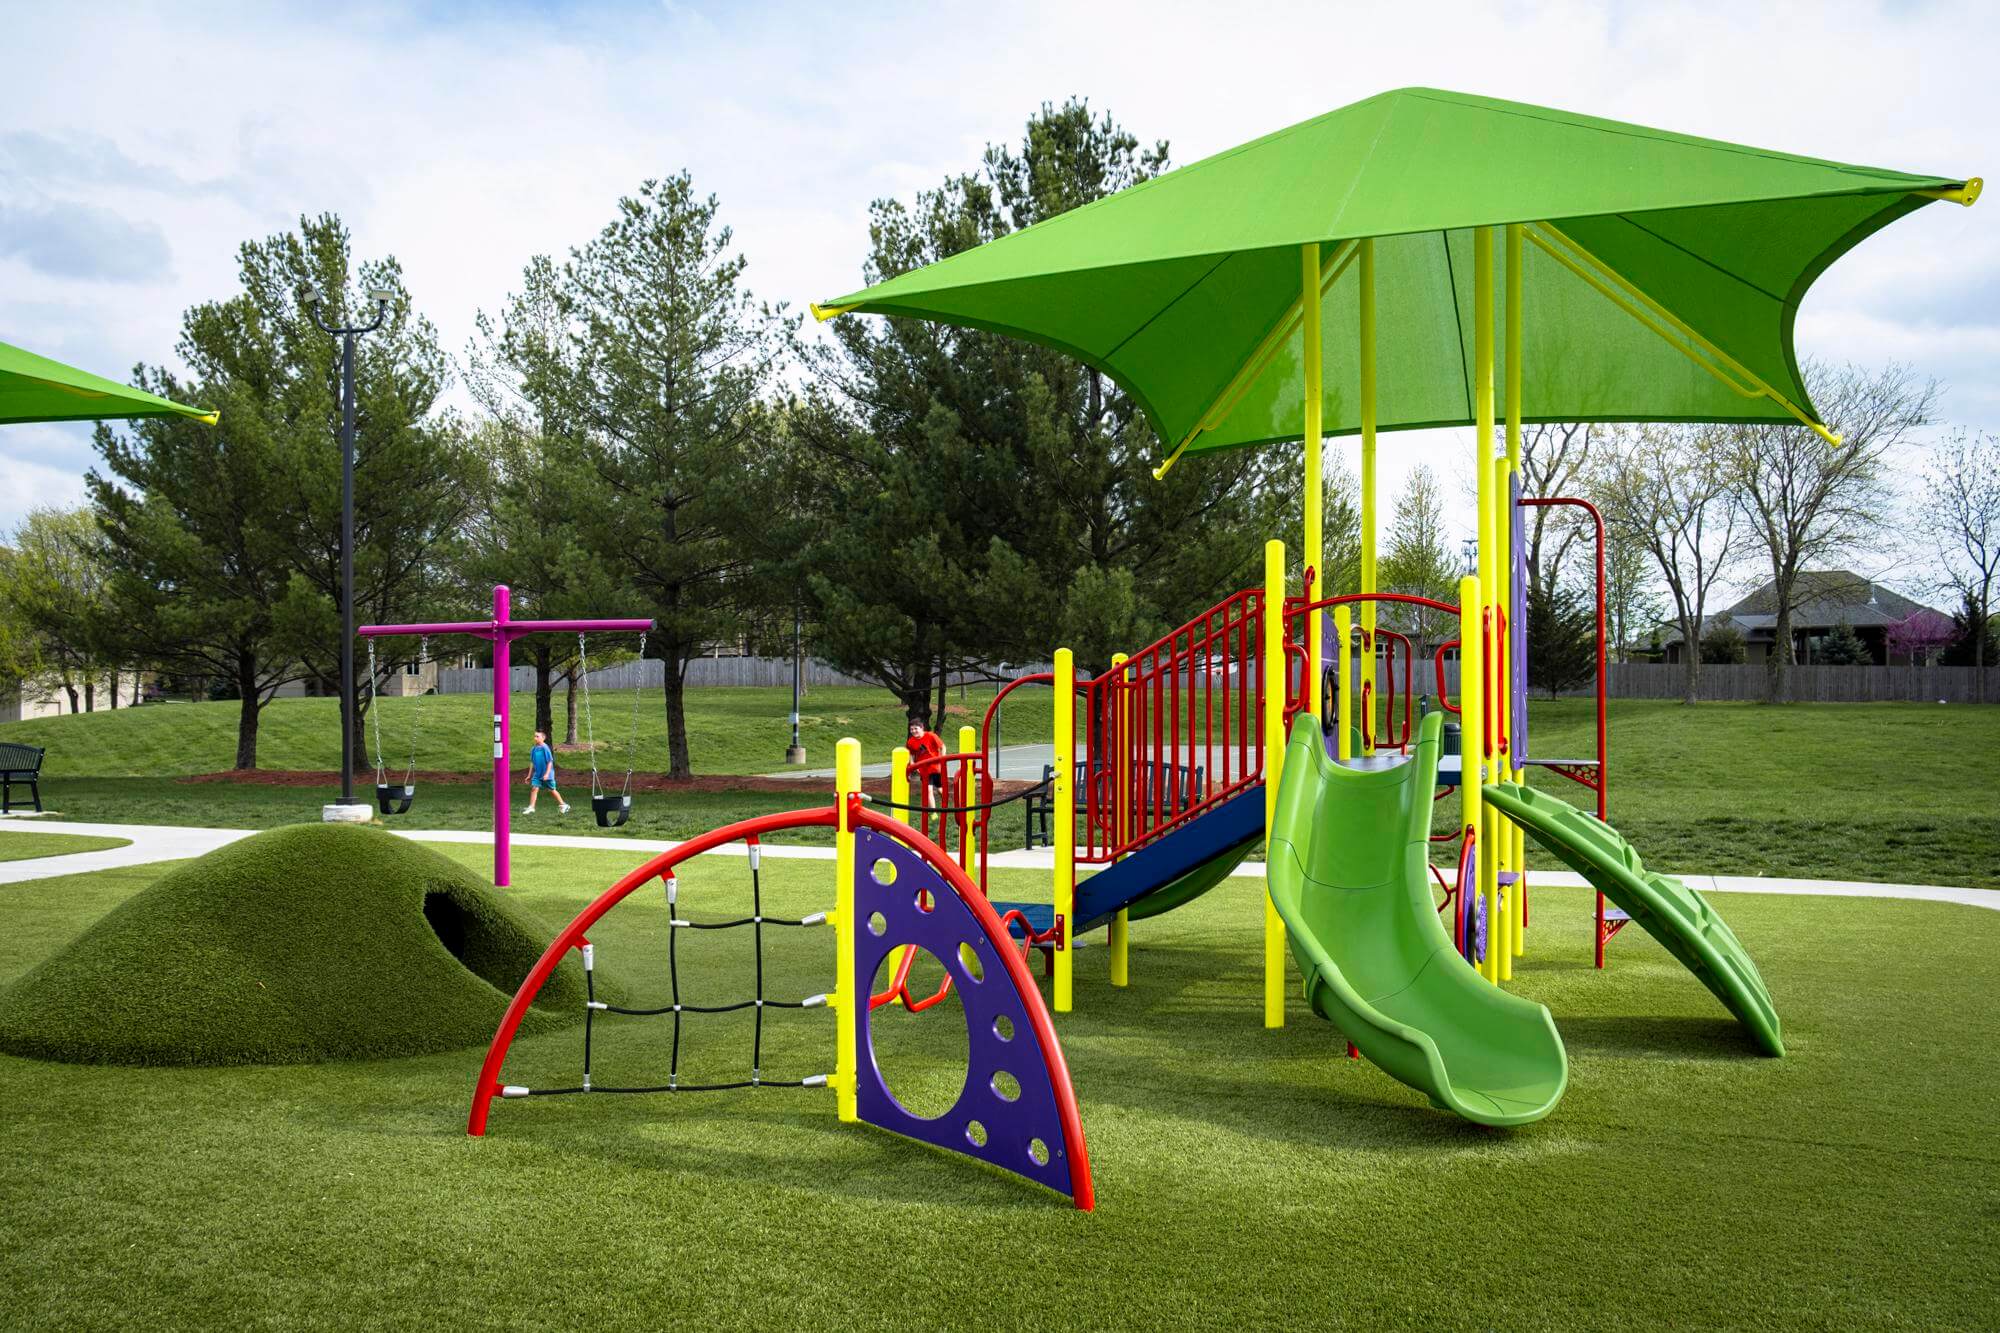 Playground with children on equipment and a dome climber on well-maintained synthetic grass.